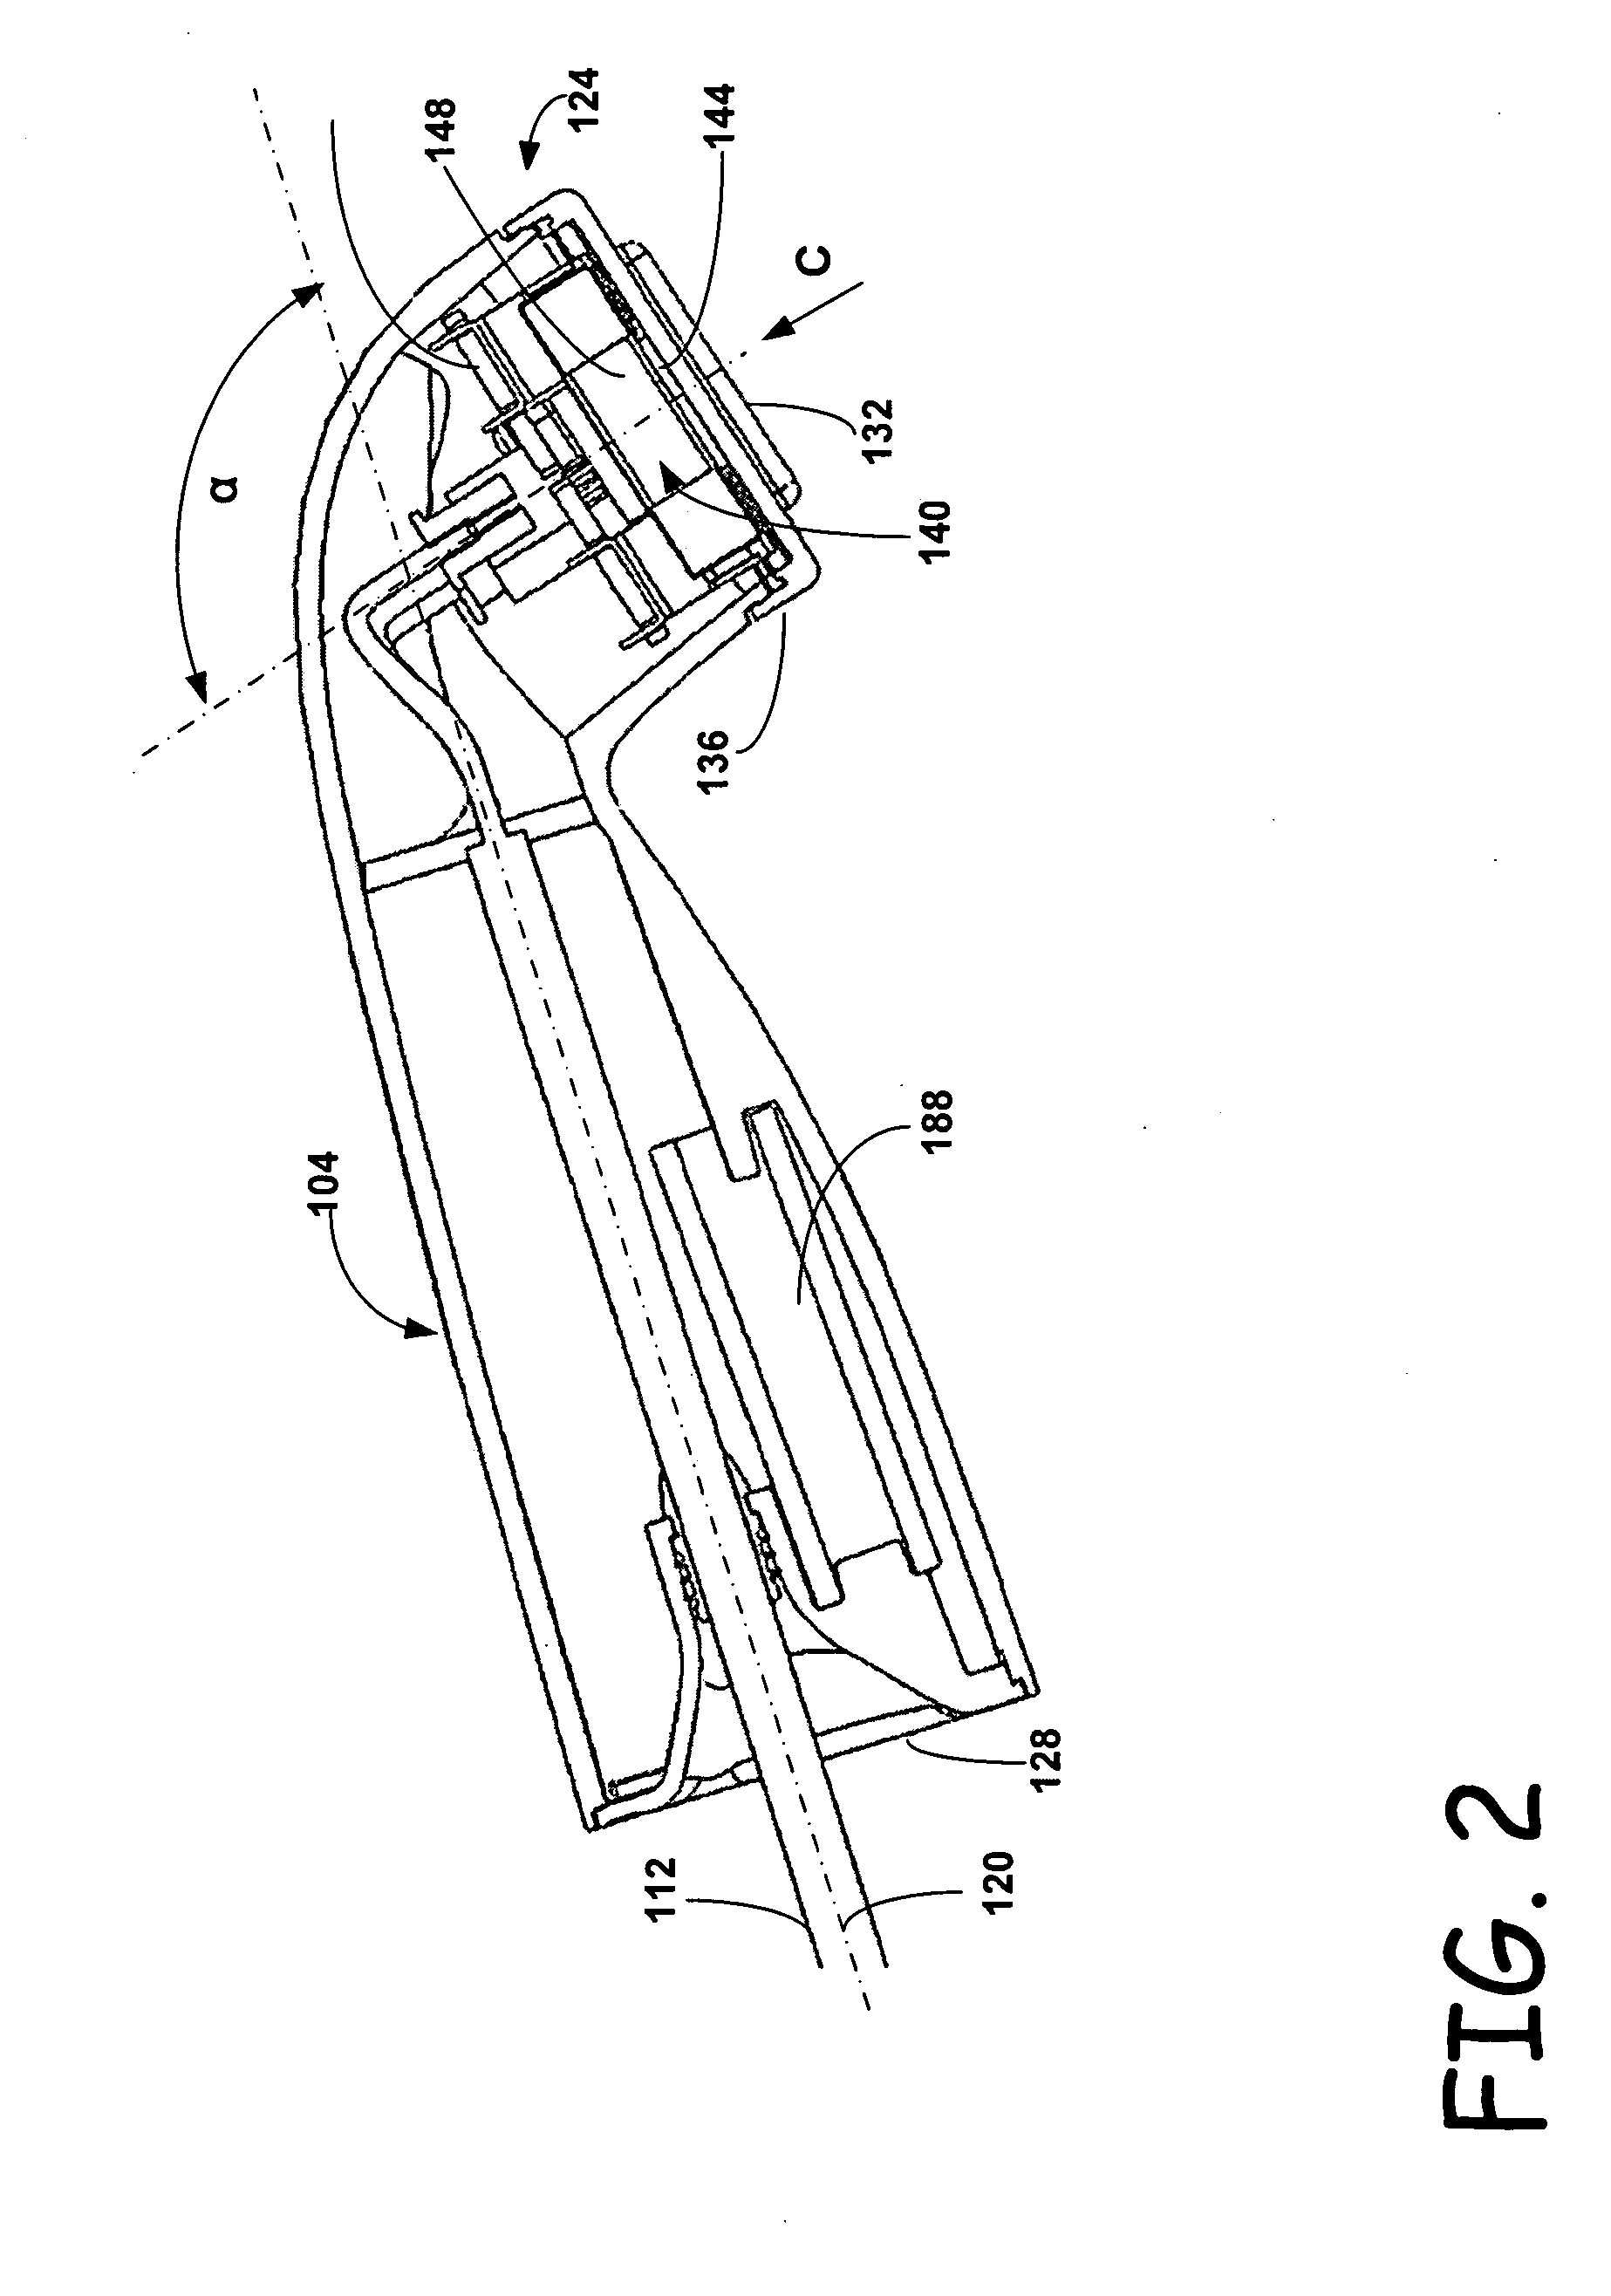 Skin treatment apparatus for personal use and method for using same